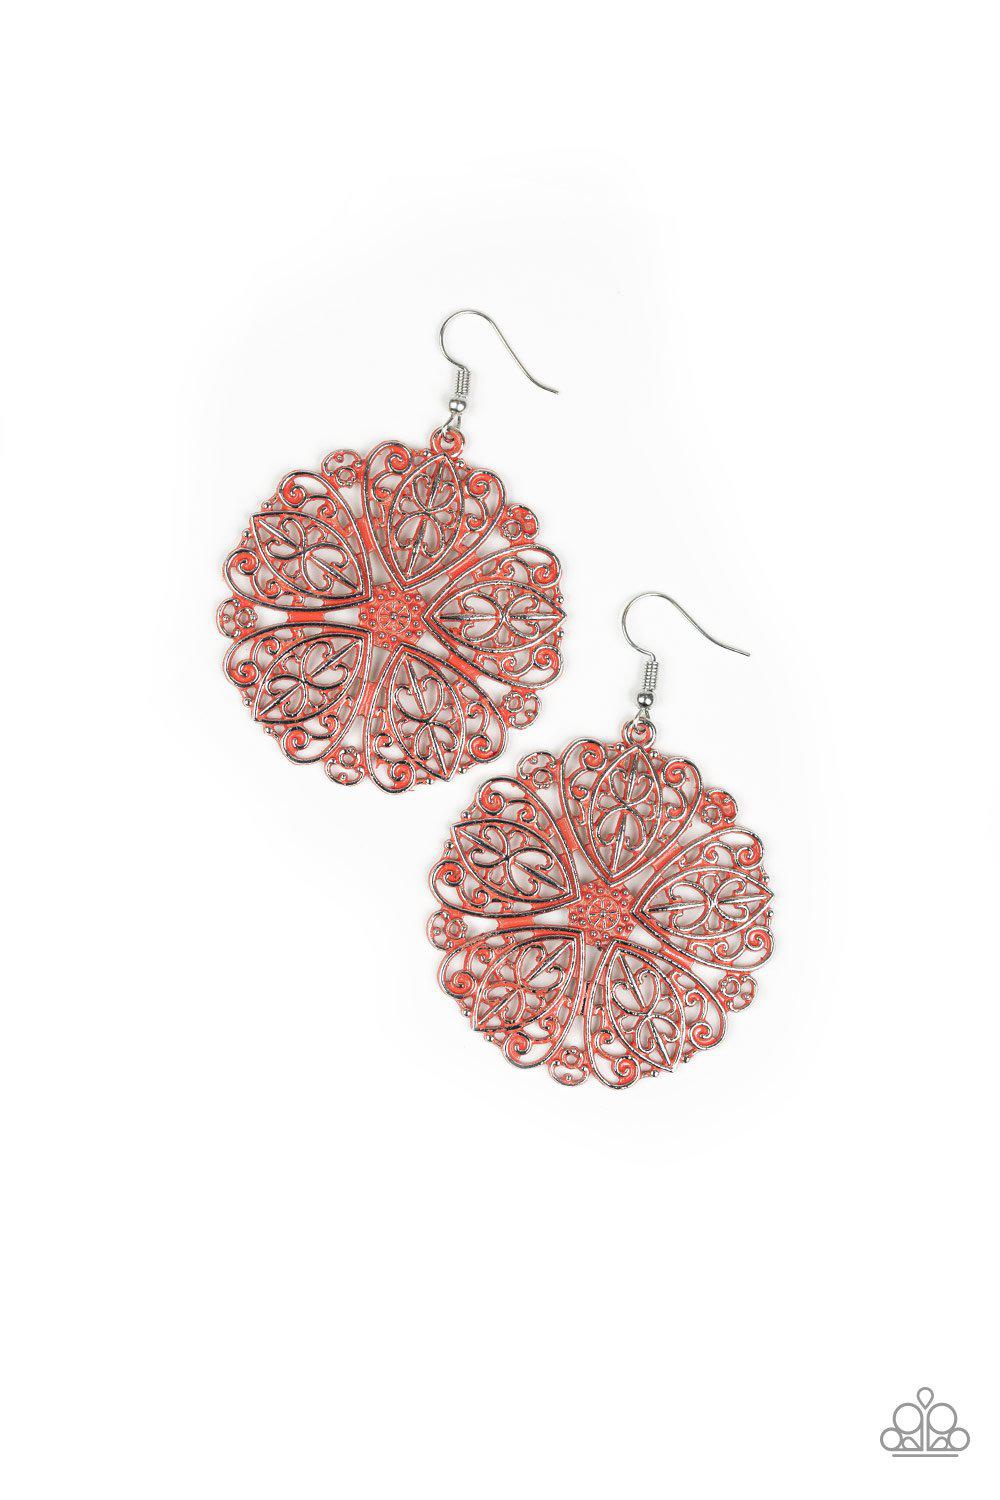 Ocean Paradise Coral Floral Filigree Earrings - Paparazzi Accessories-CarasShop.com - $5 Jewelry by Cara Jewels